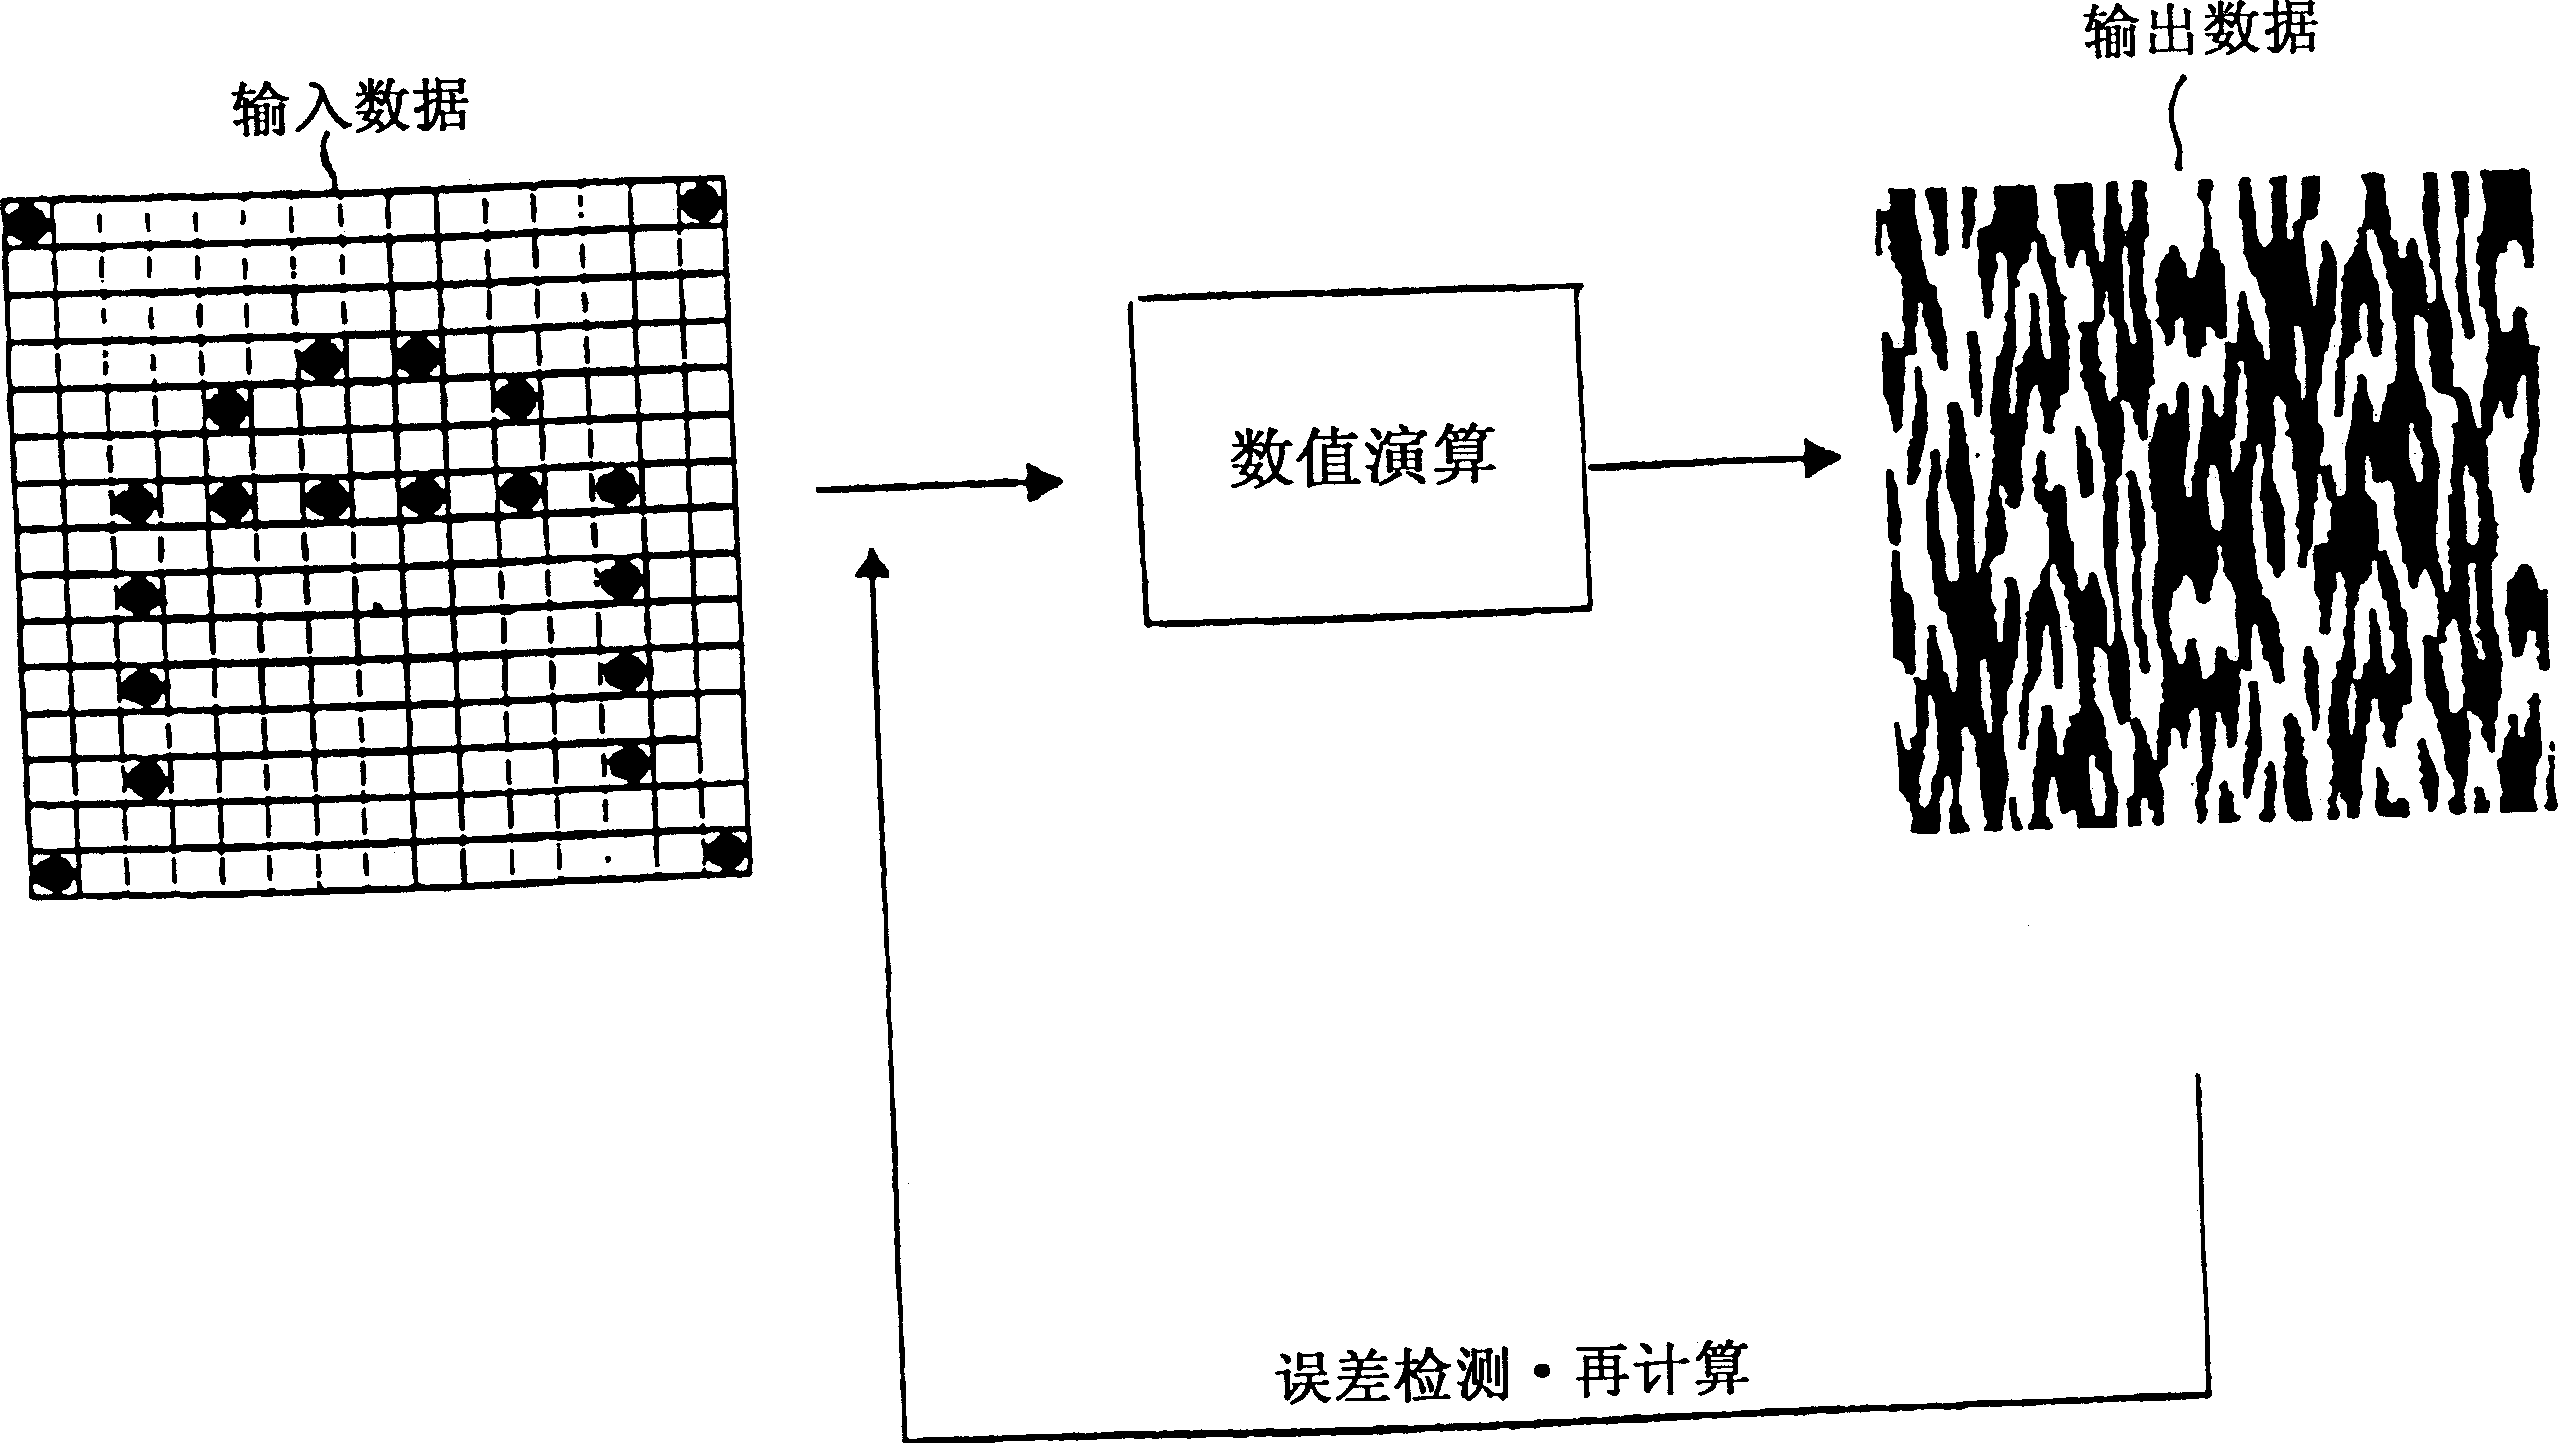 Card vending system and card recognising system